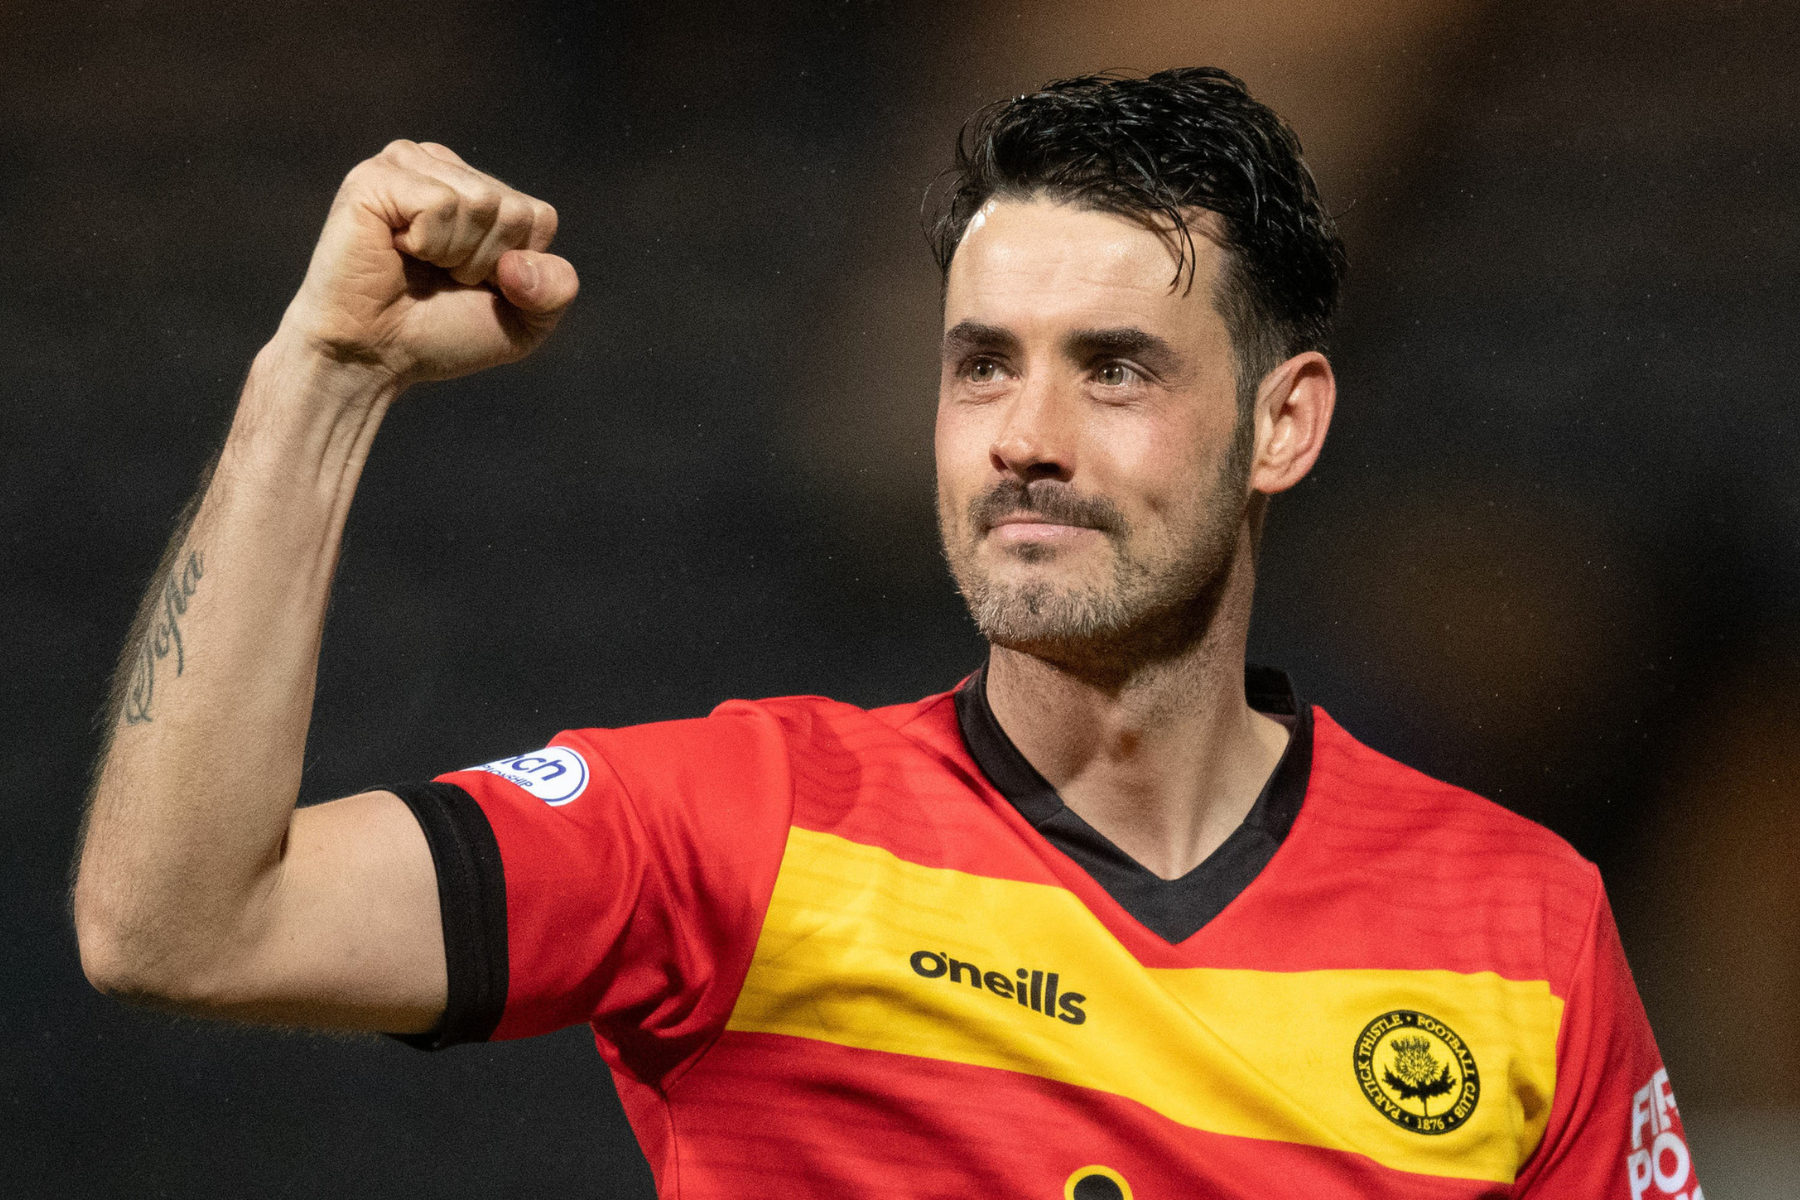 Graham keen to play on beyond latest Partick Thistle deal